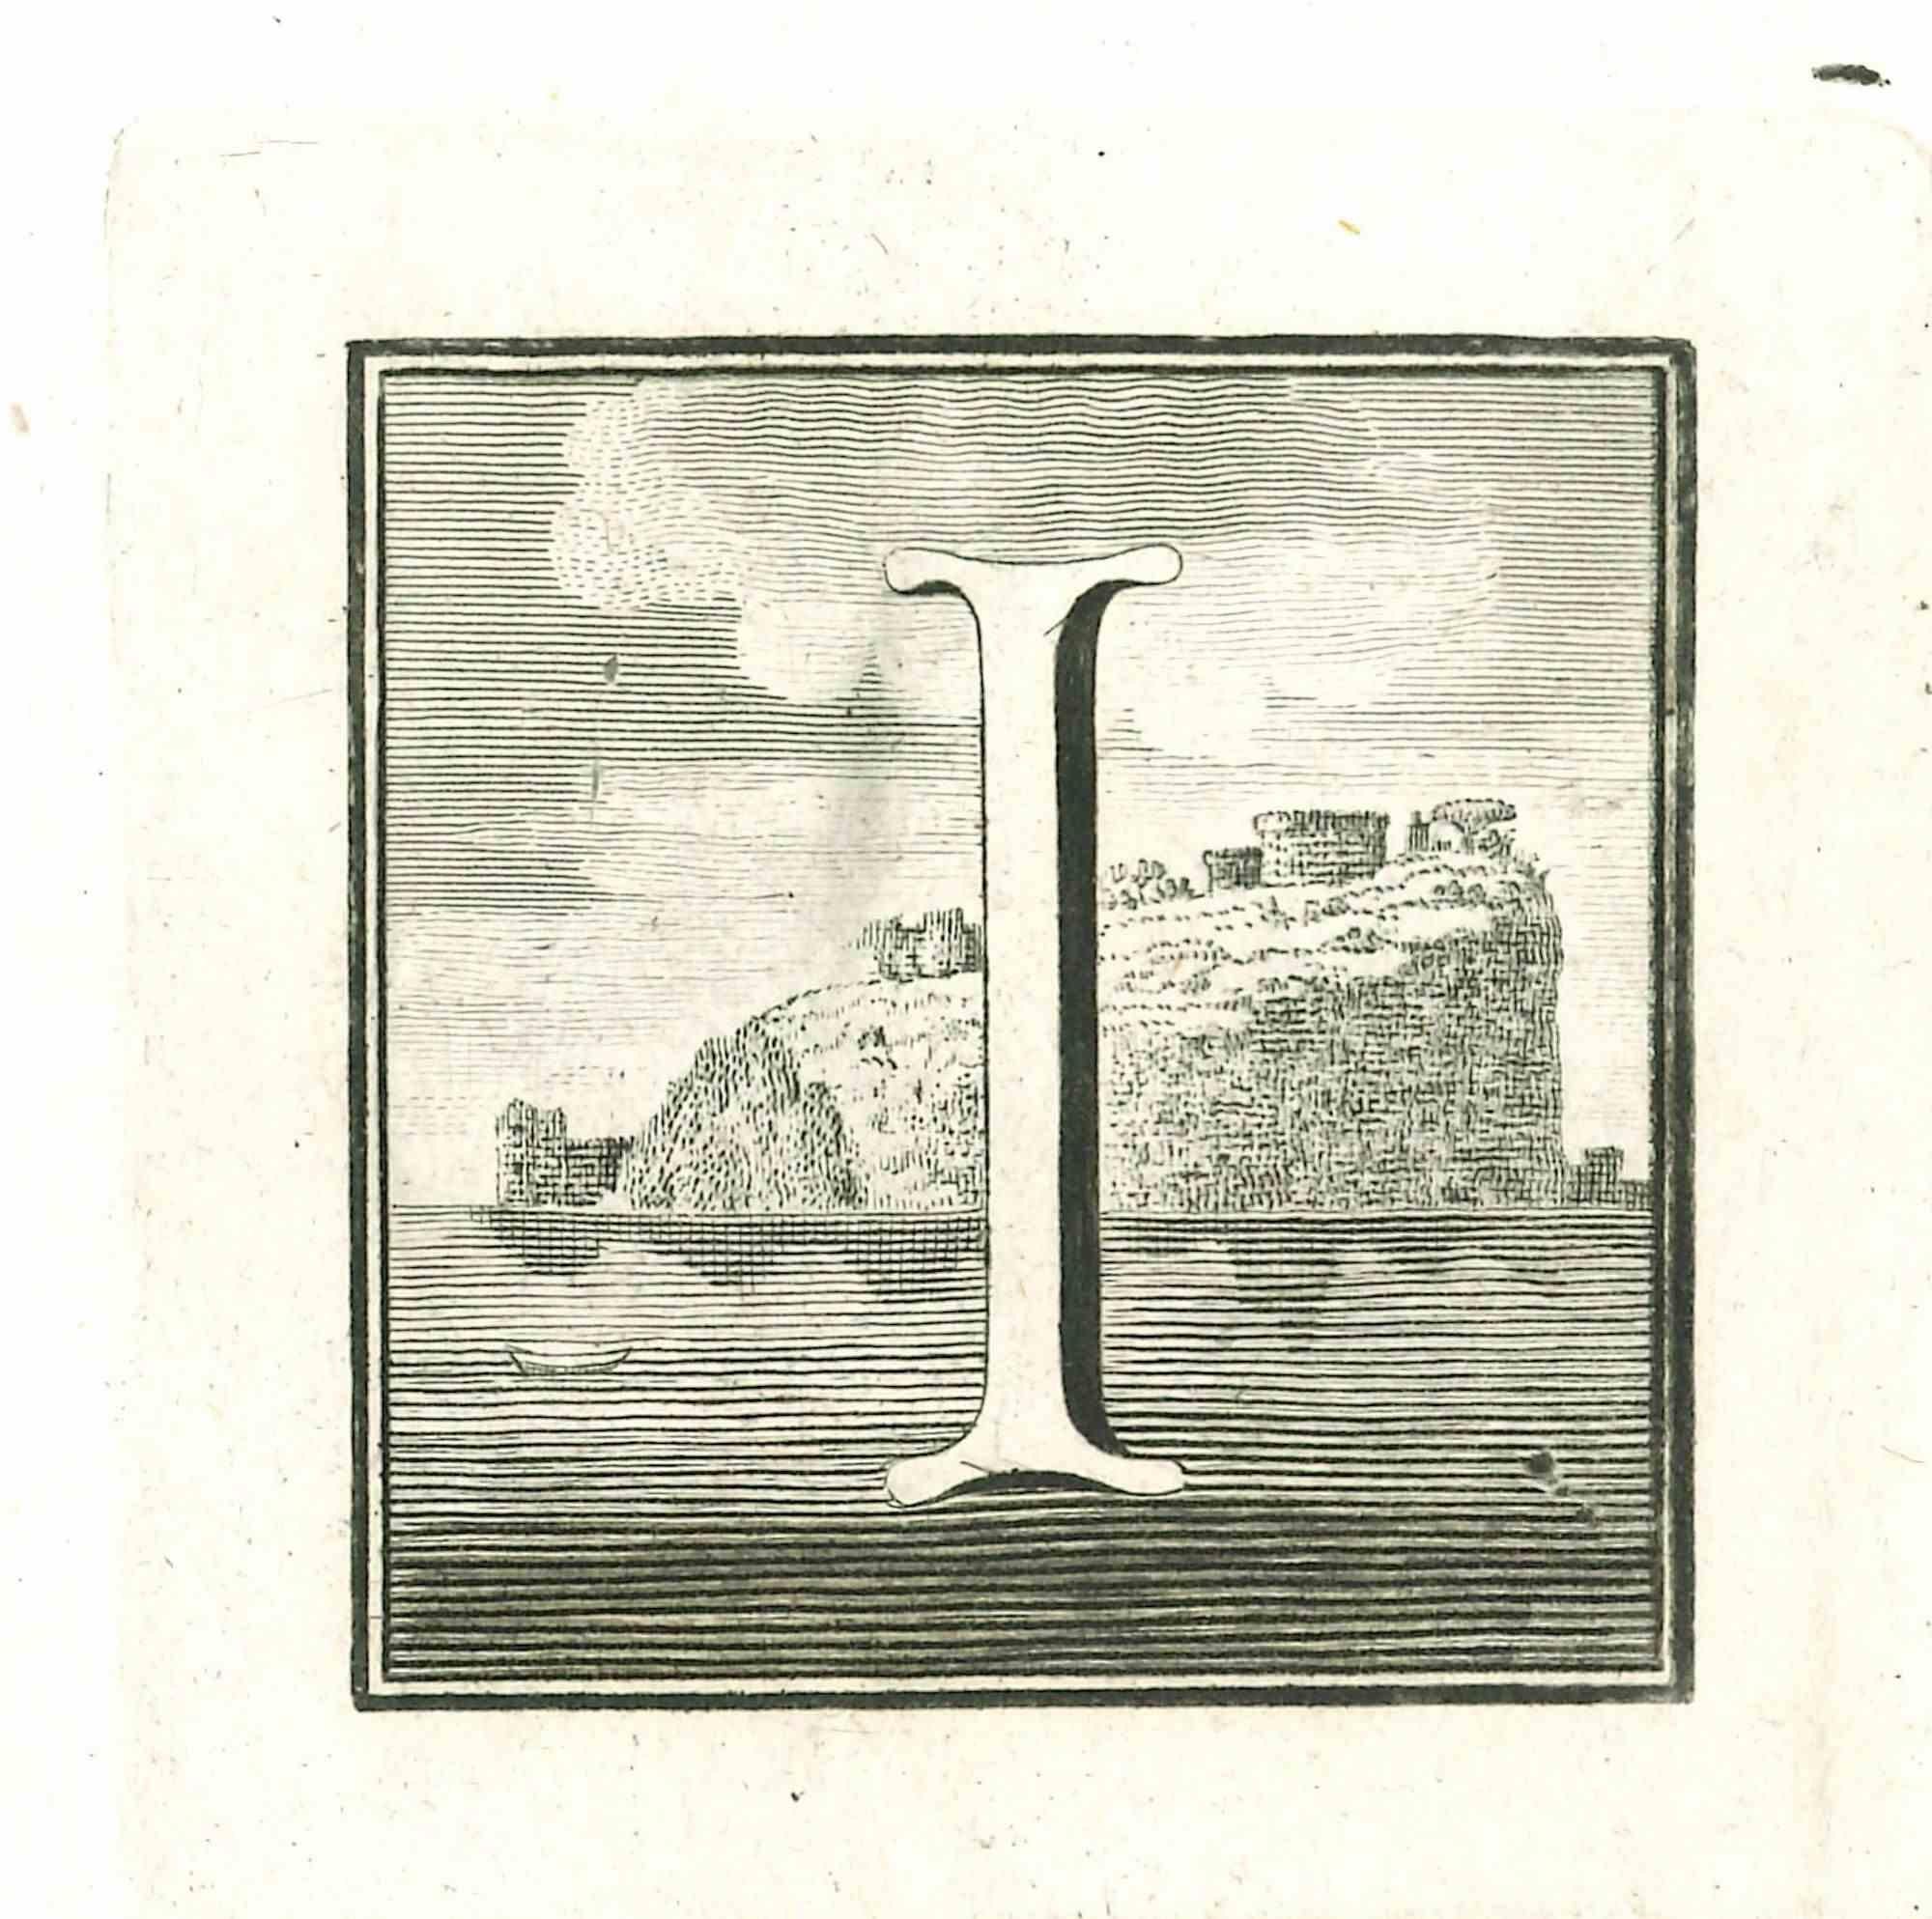 Unknown Figurative Print - Capital letter I from the Antiquities of Herculaneum - Etching - 18th Century